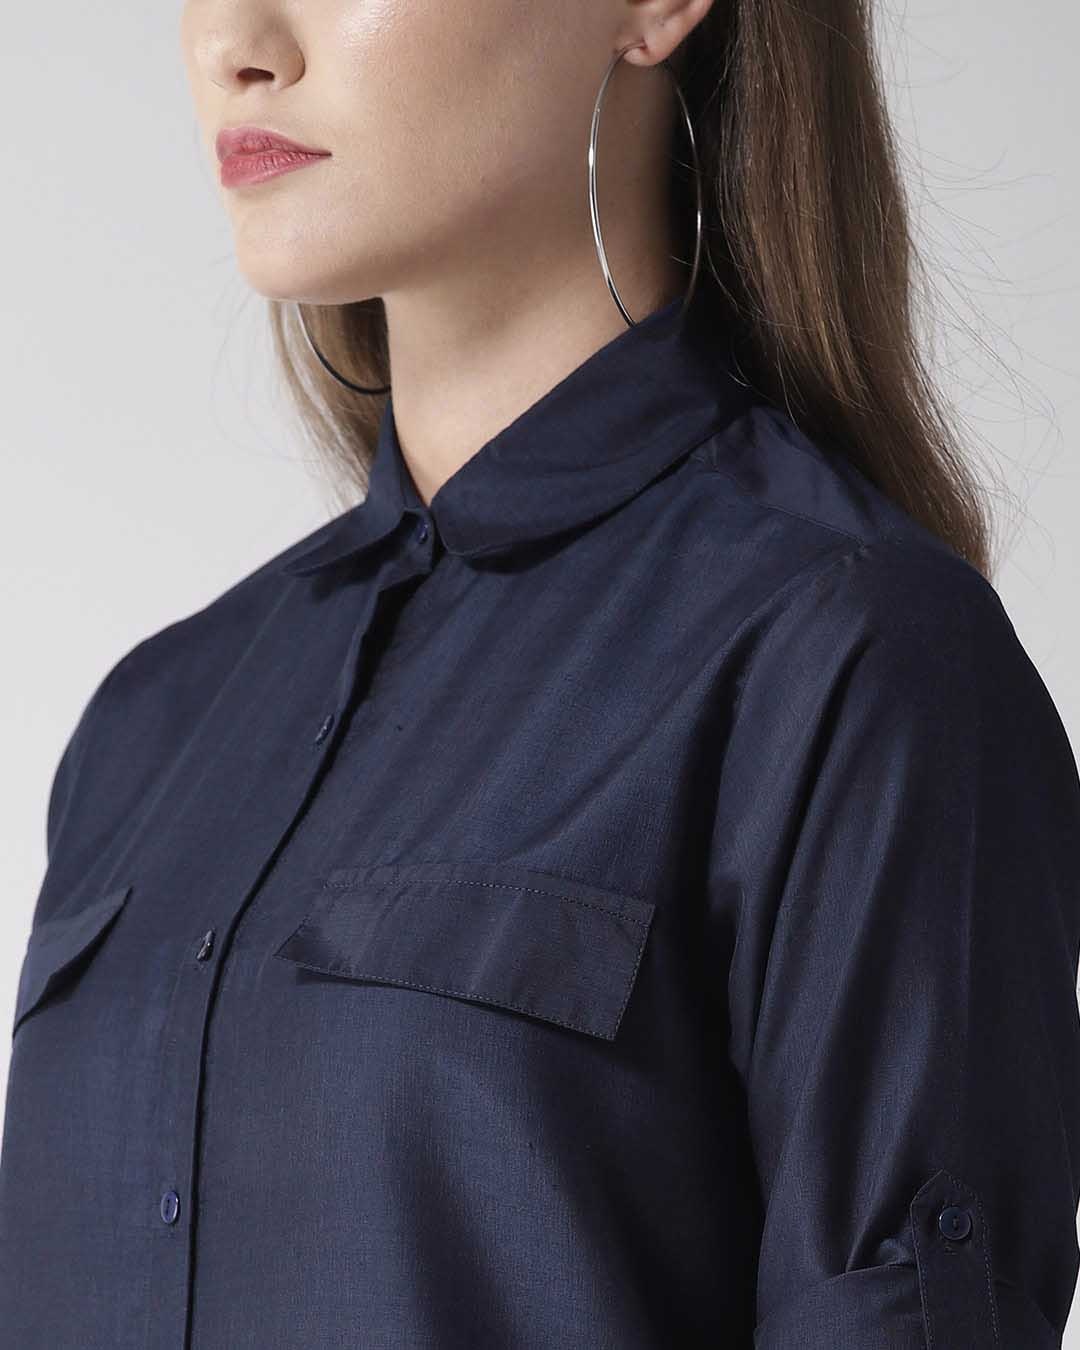 Shop Women's Navy Blue Classic Fit Solid Casual Shirt